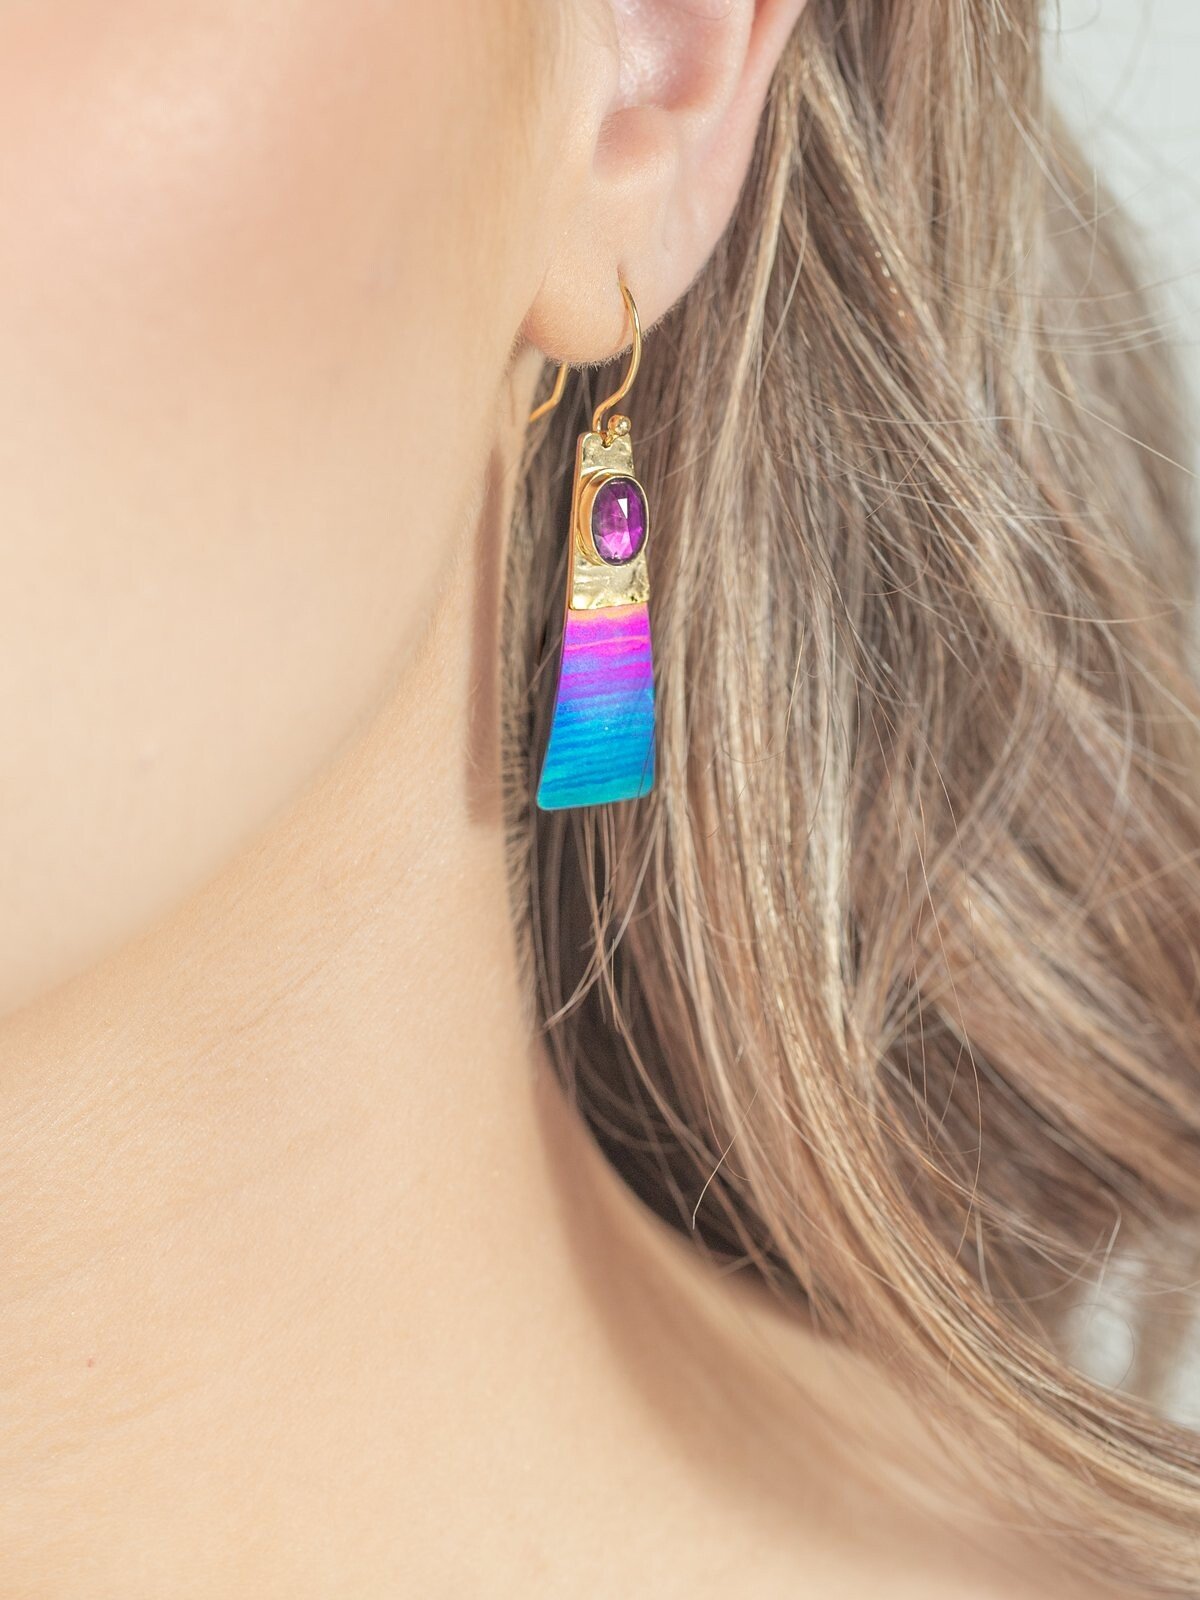 Holly Yashi Regalia Earrings - Teal and Gold    